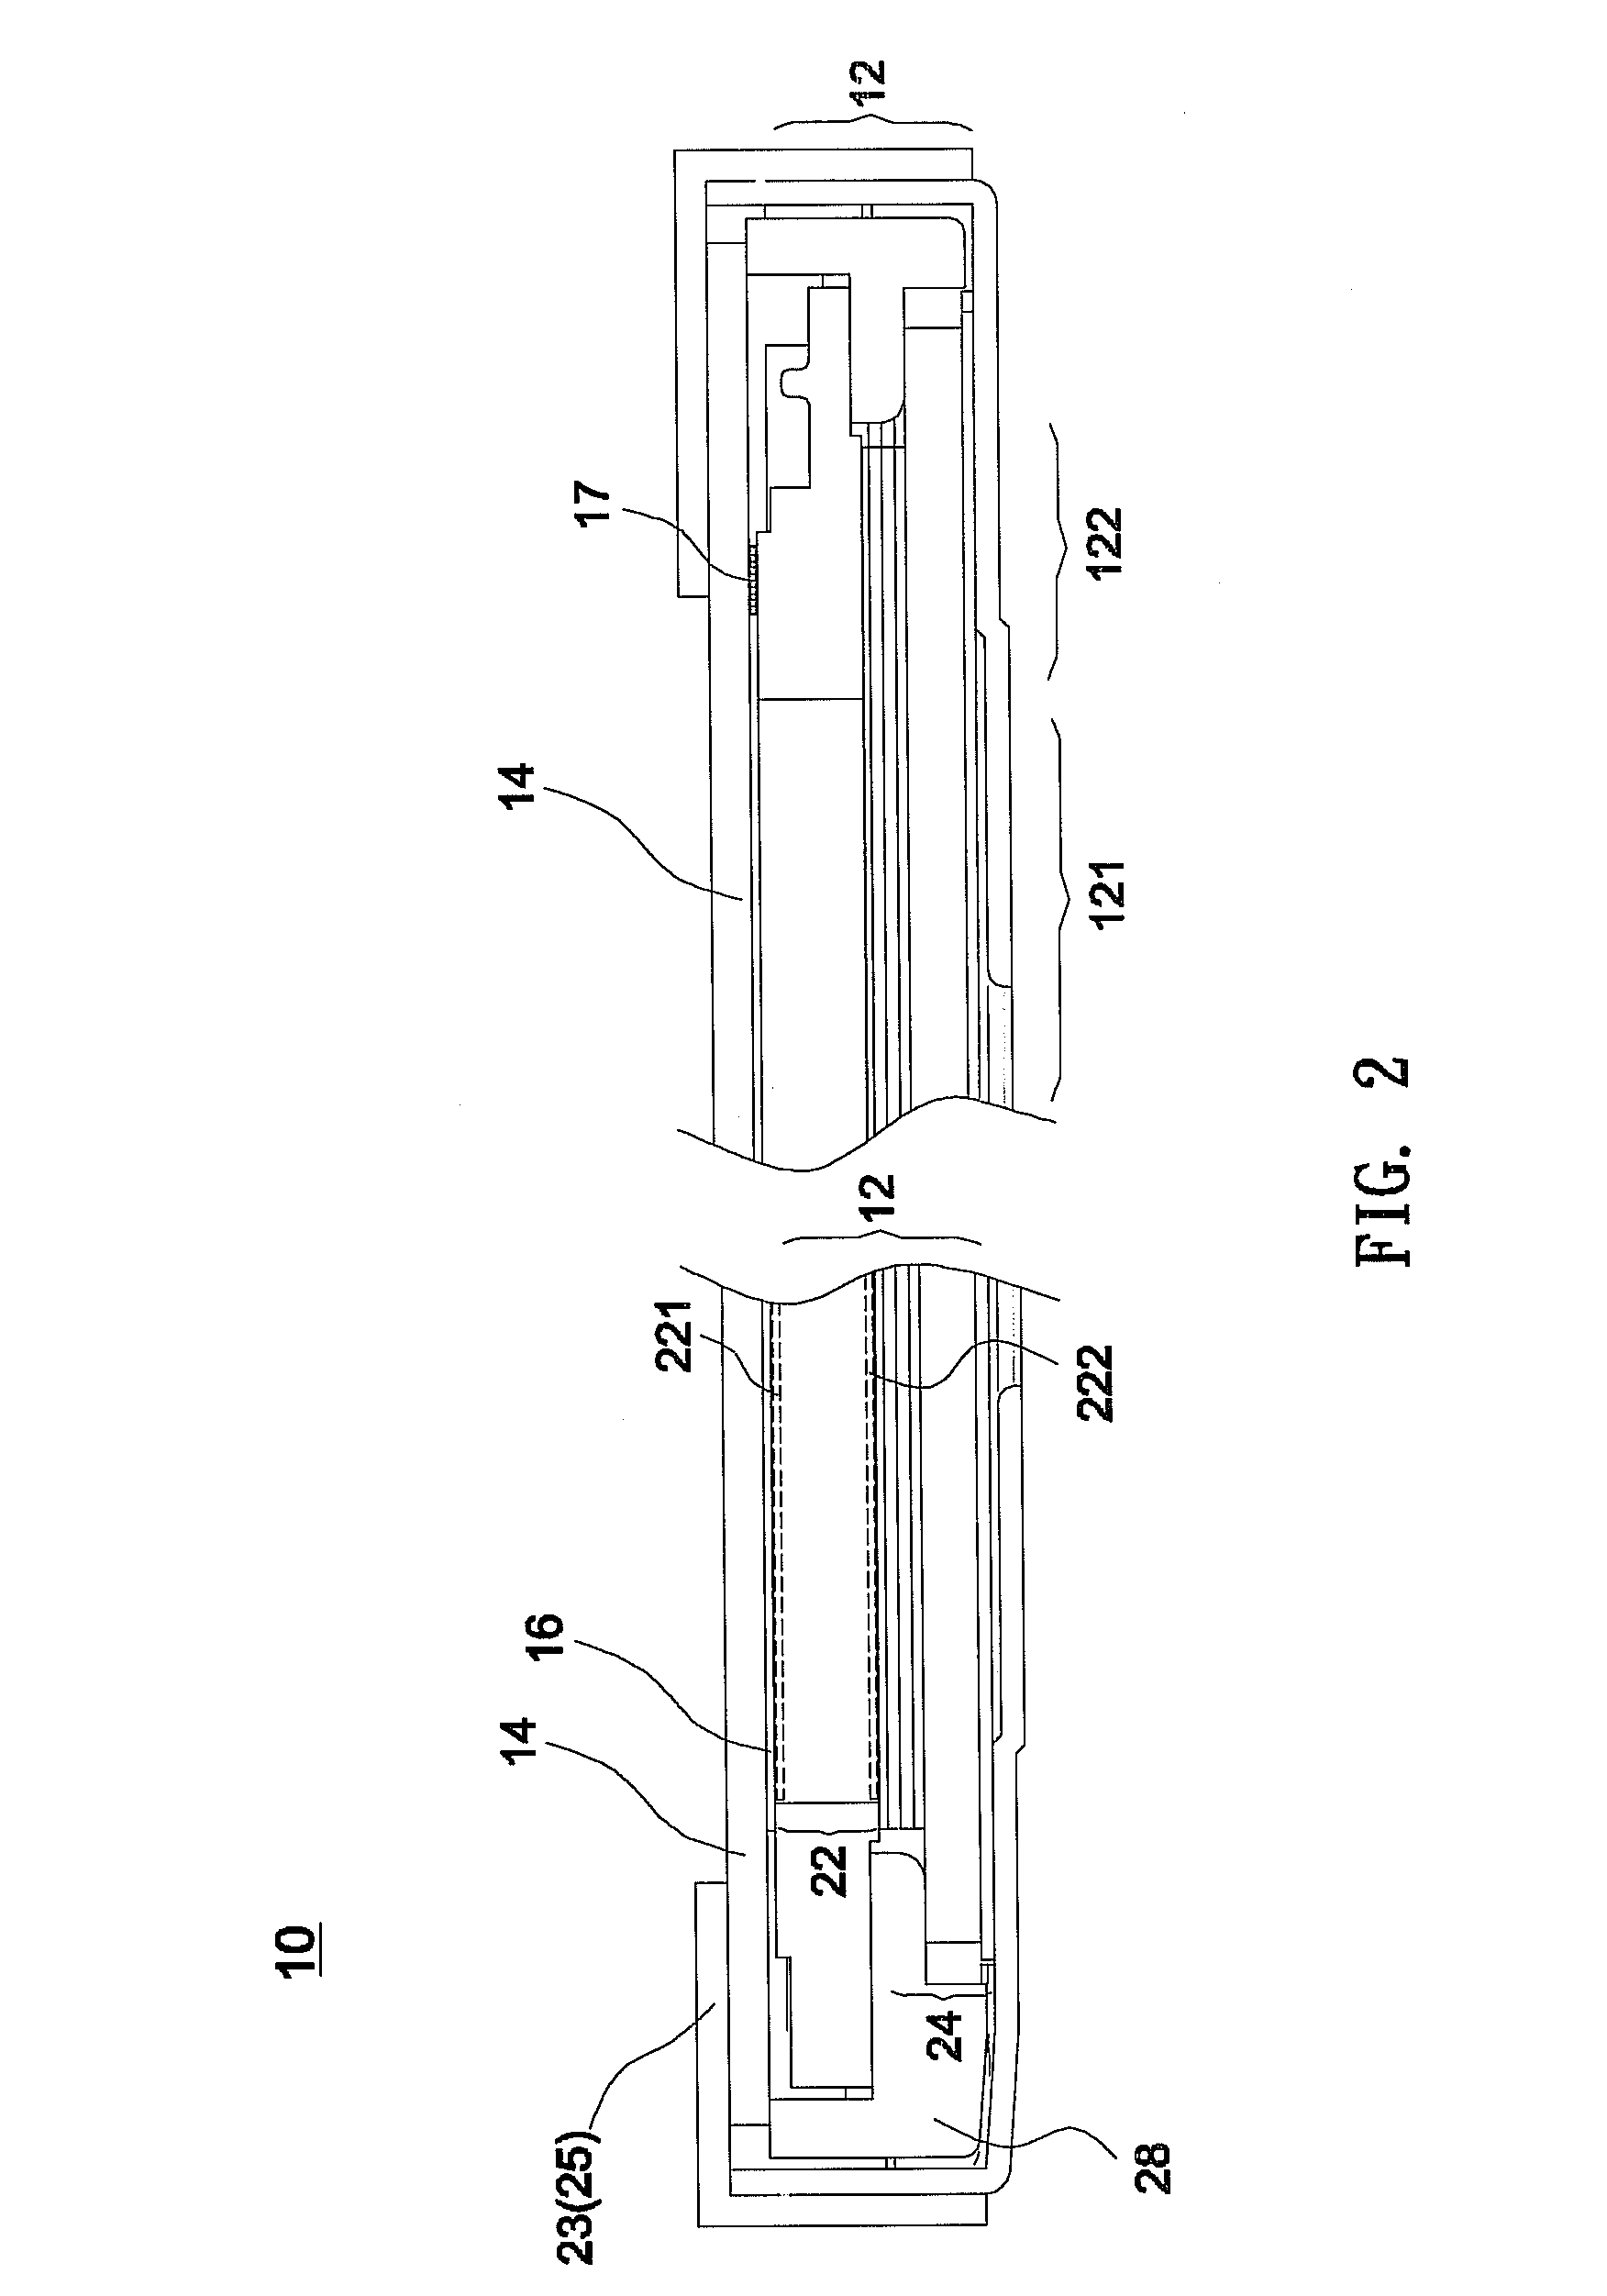 Touch-sensitive display device